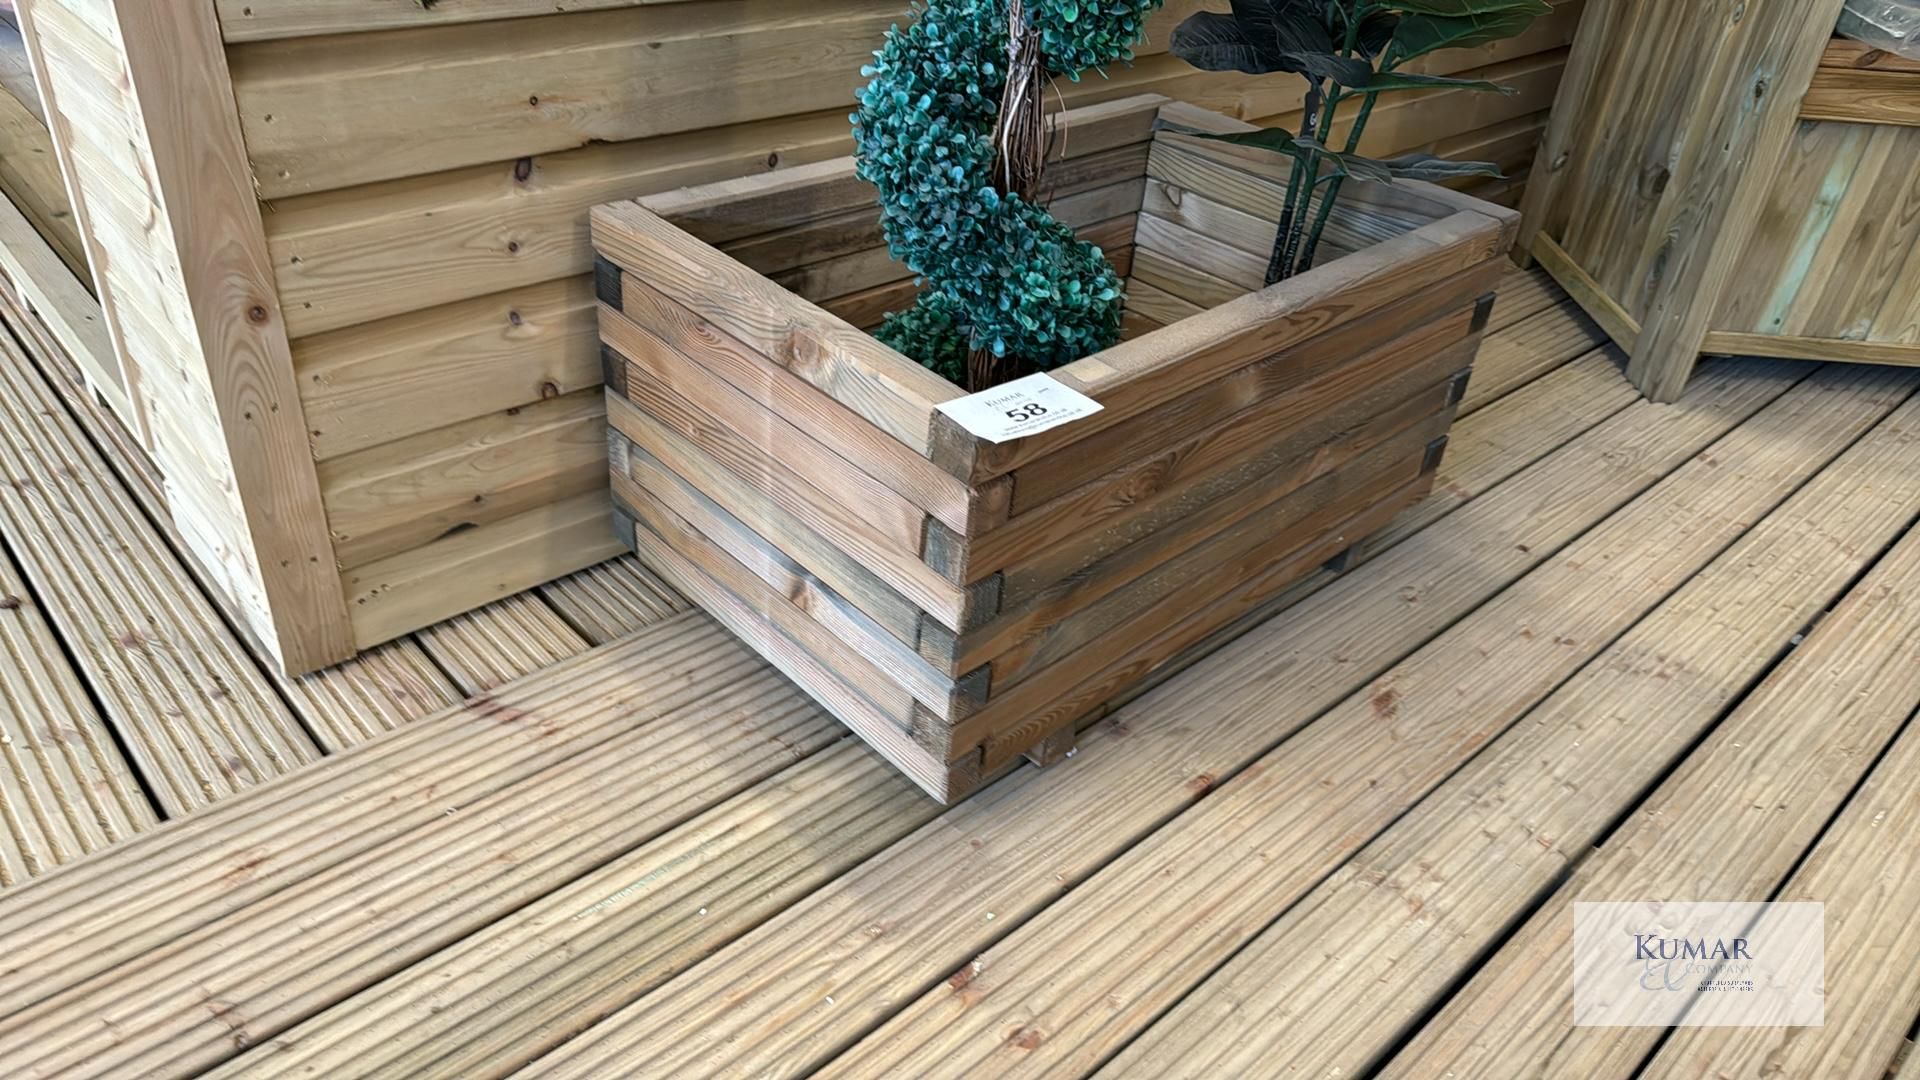 Gresell Single Planter, Sizes (W x D x H) 0.8m x 0.5m x 0.42m - Image 4 of 7